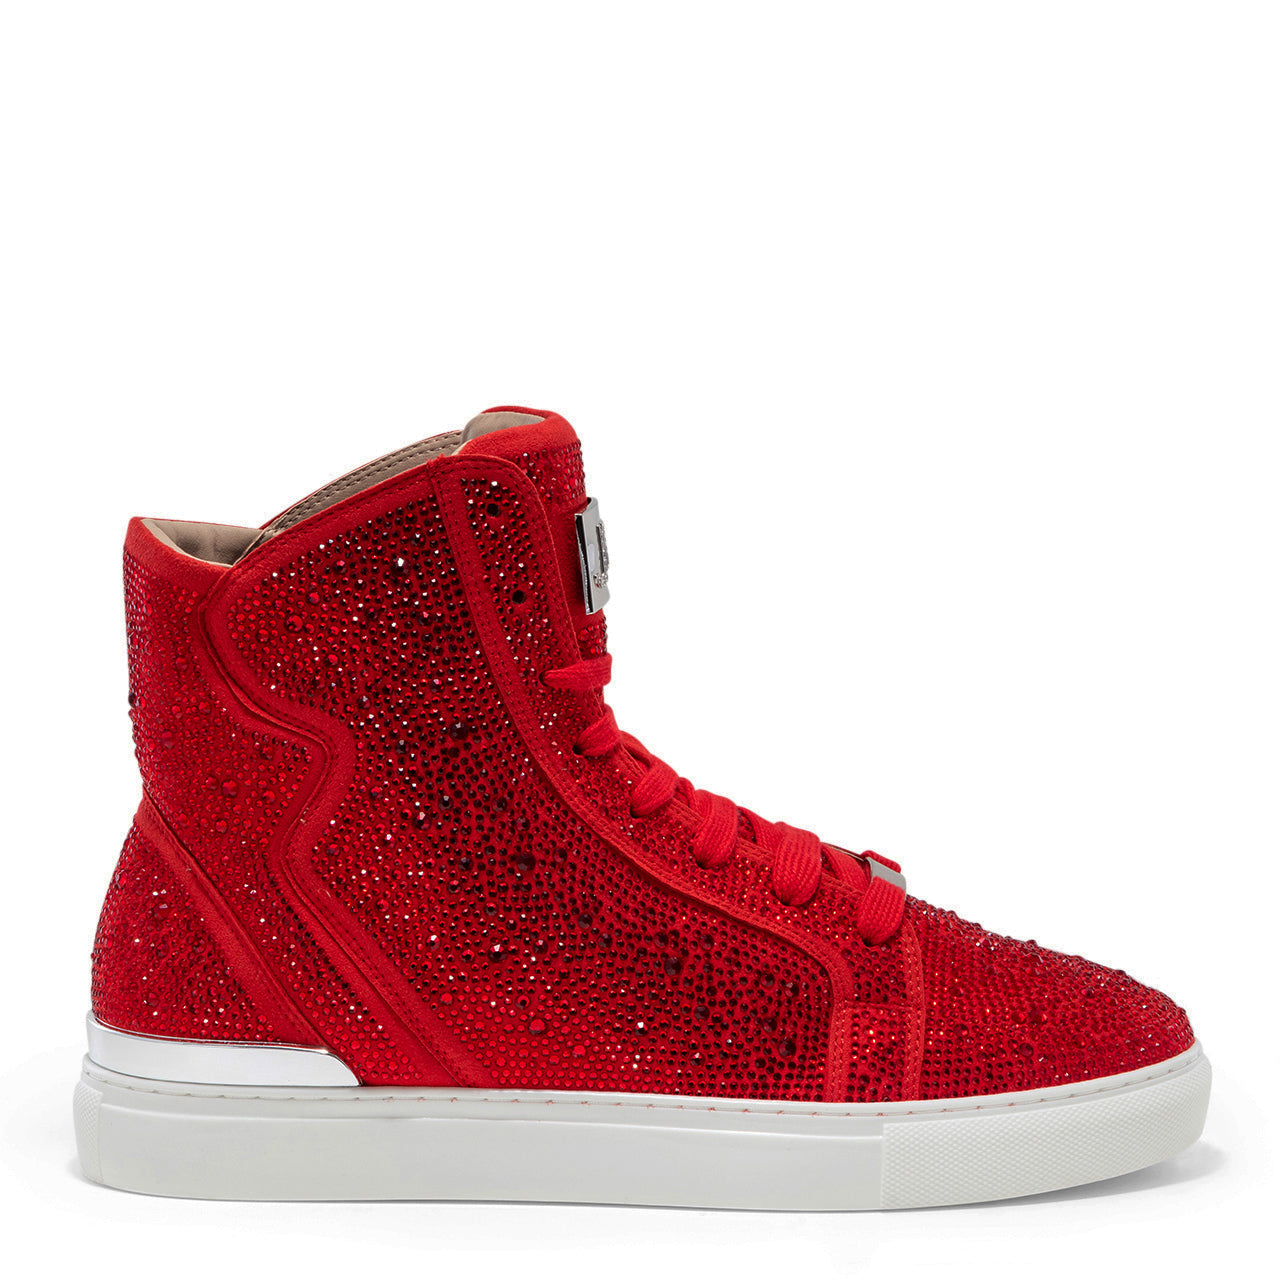 Sestos - Red High top Fashion Sneakers for Men by J75 5